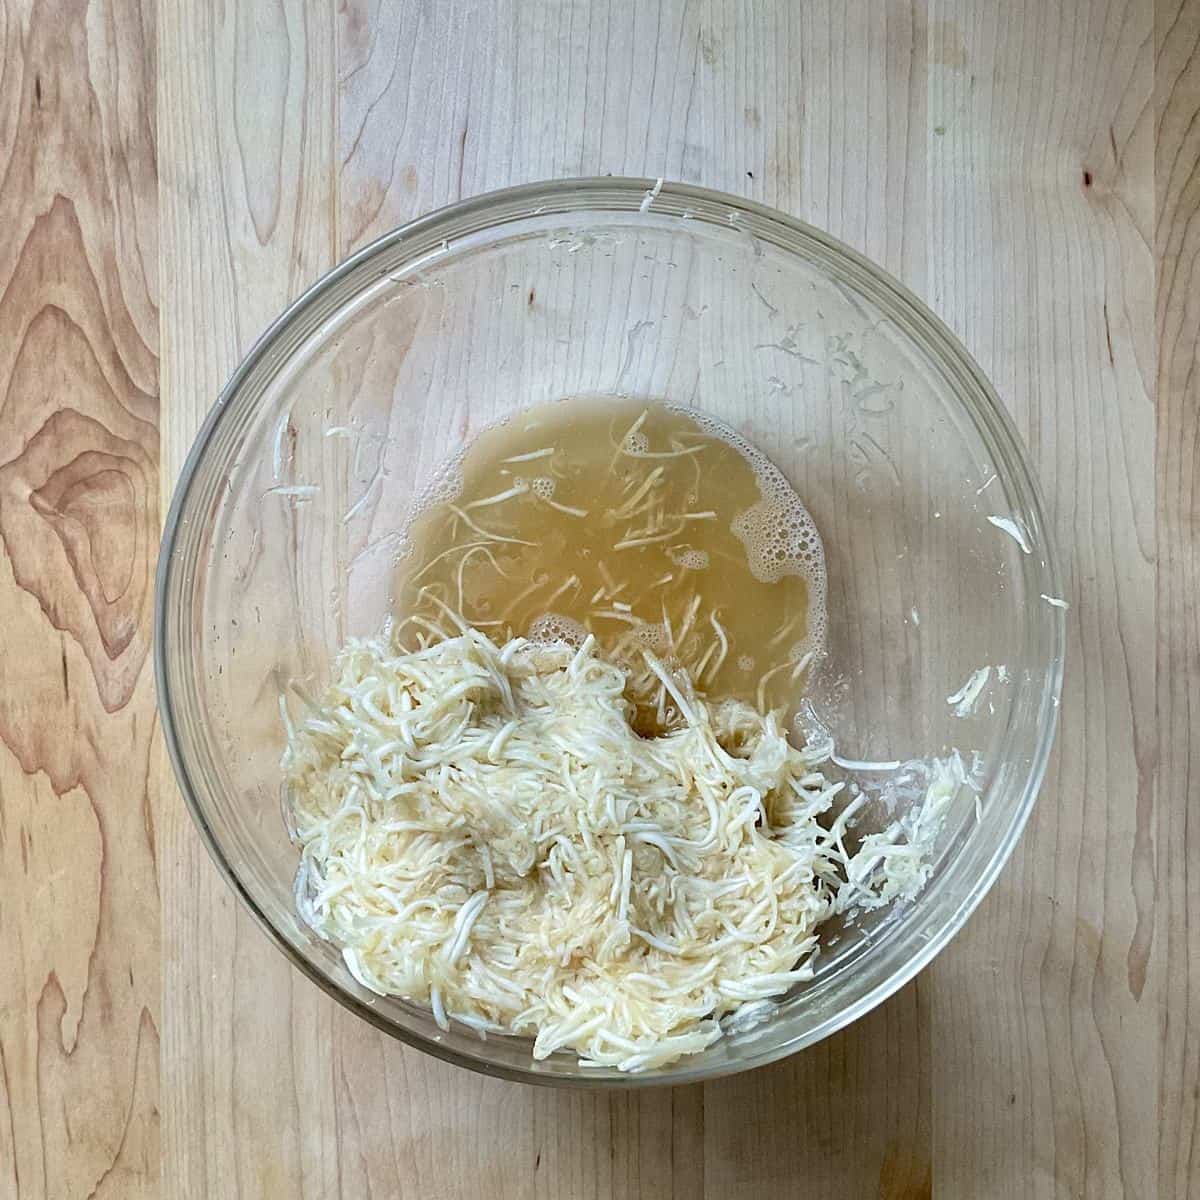 The excess liquid from squeezing celery root in a bowl.